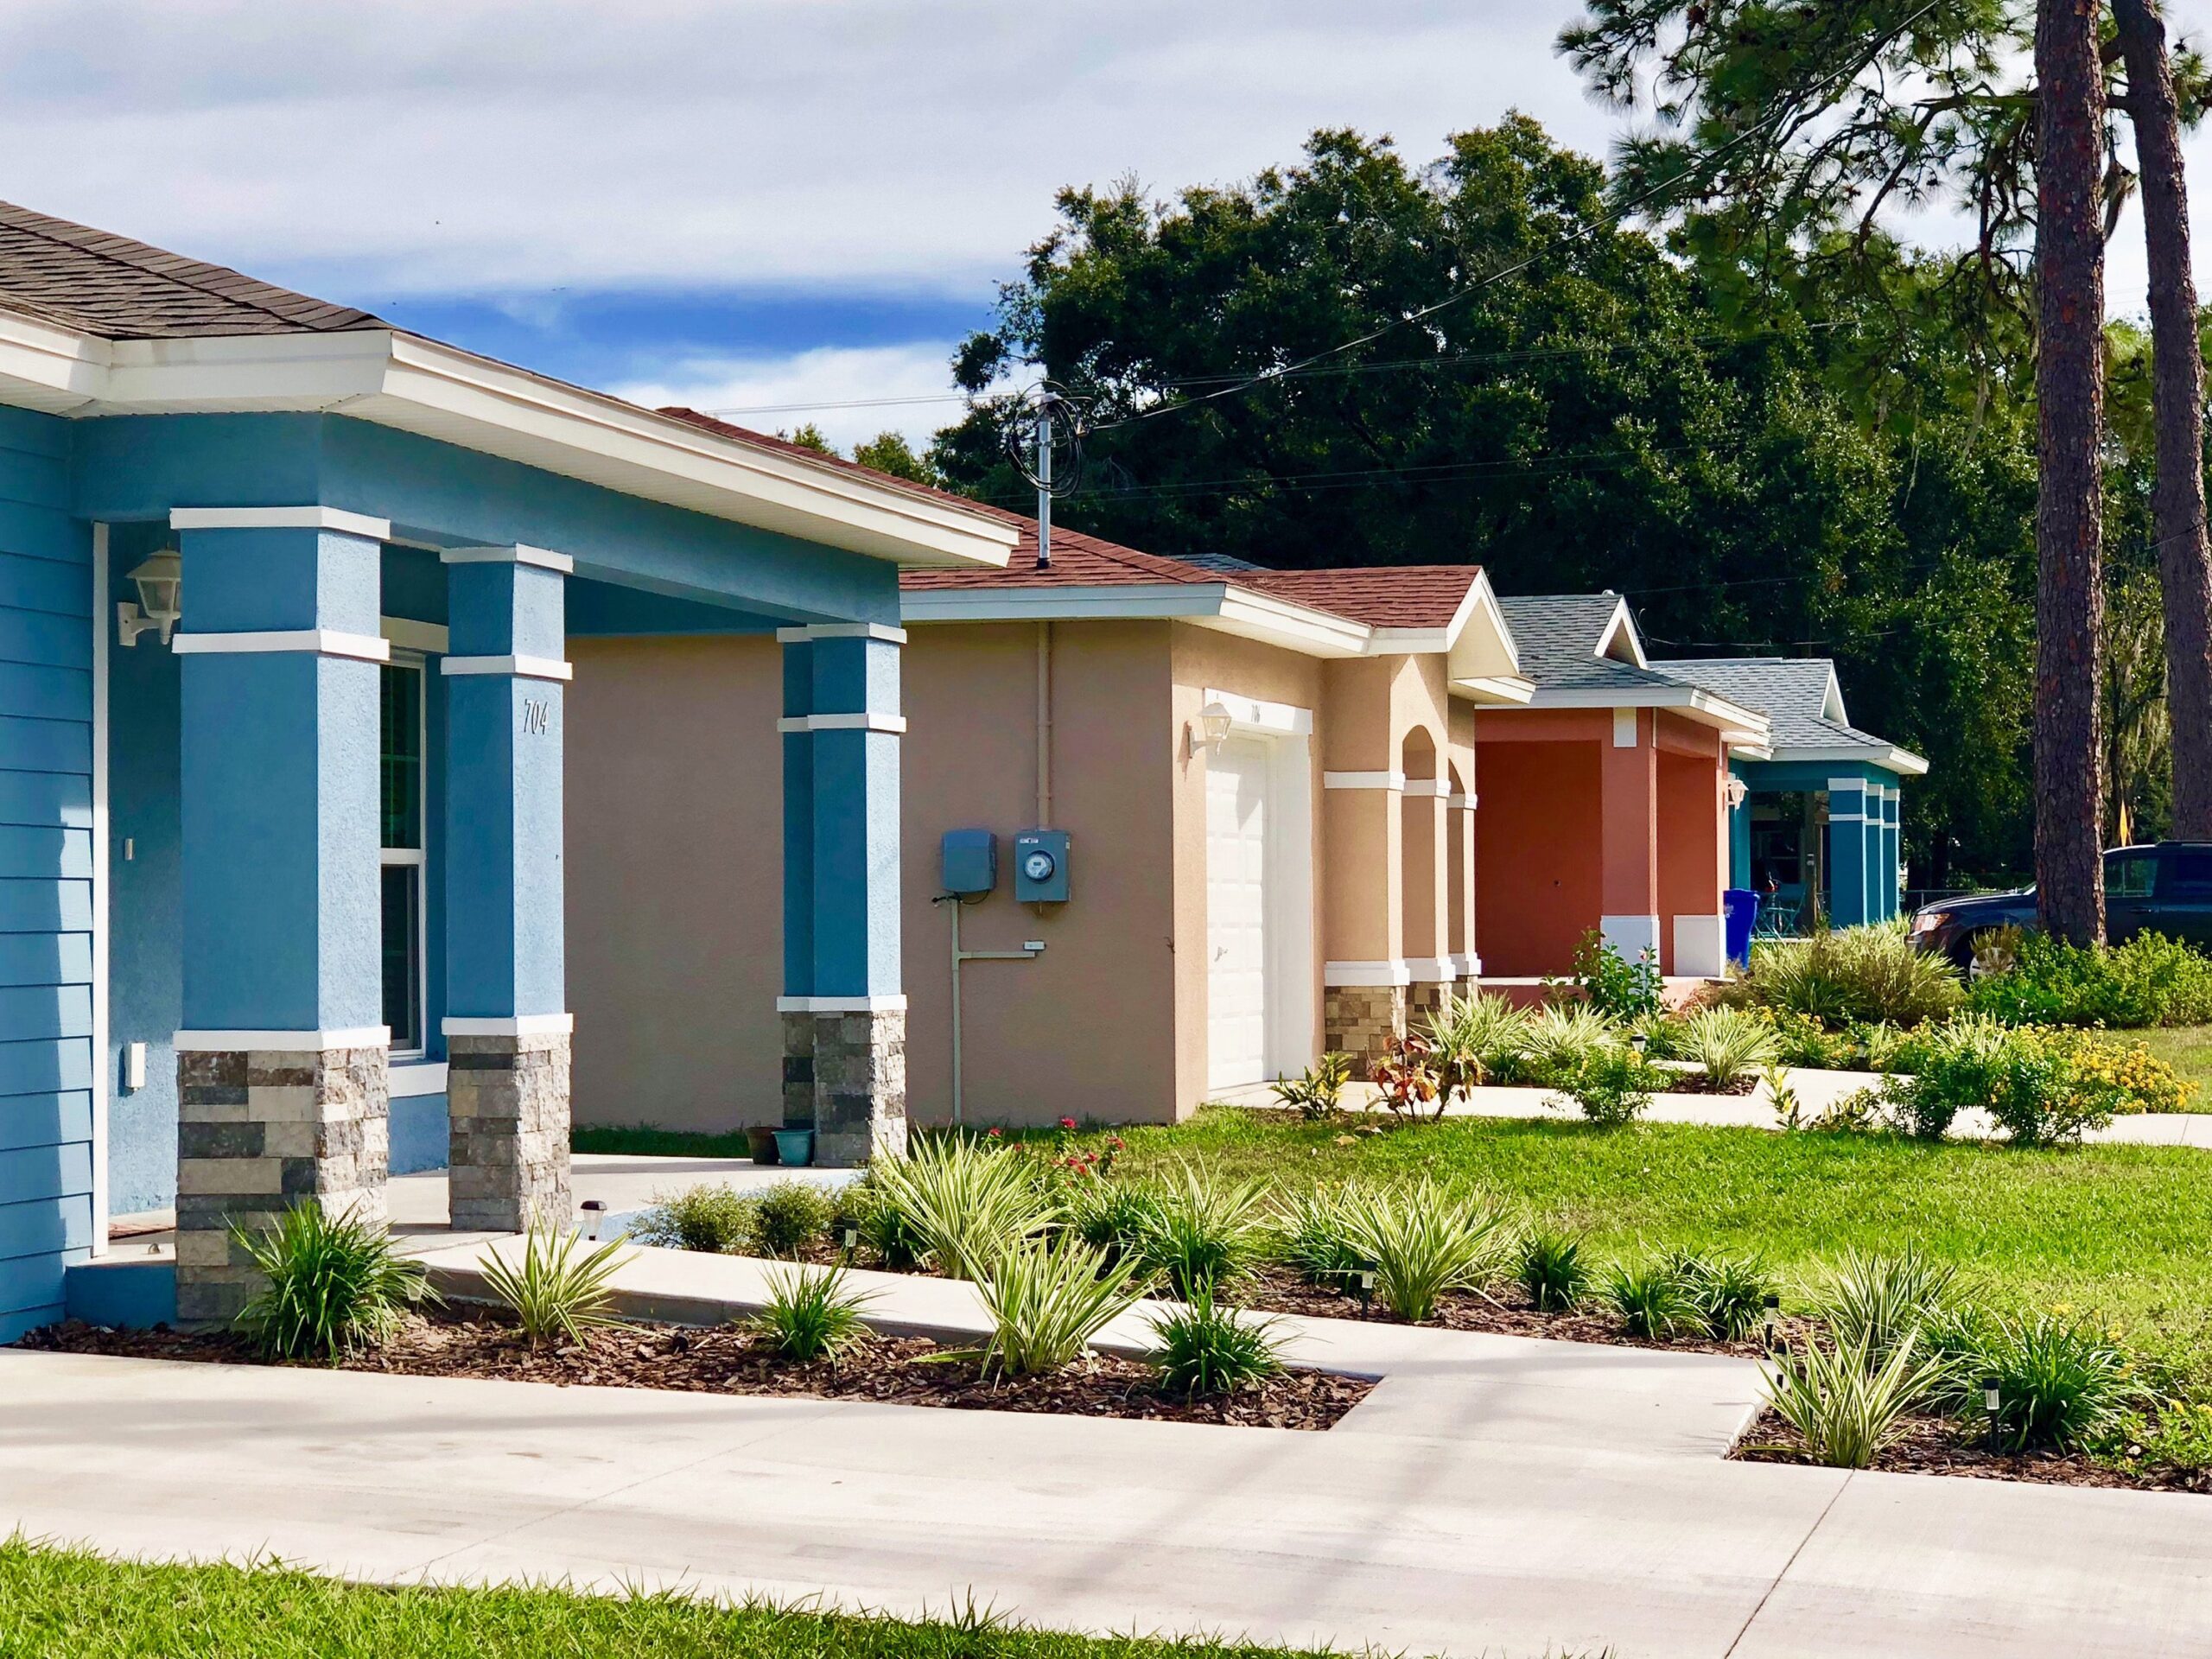 OPINION: Hillsborough County cutting affordable housing funds leaves Tampa in the cold